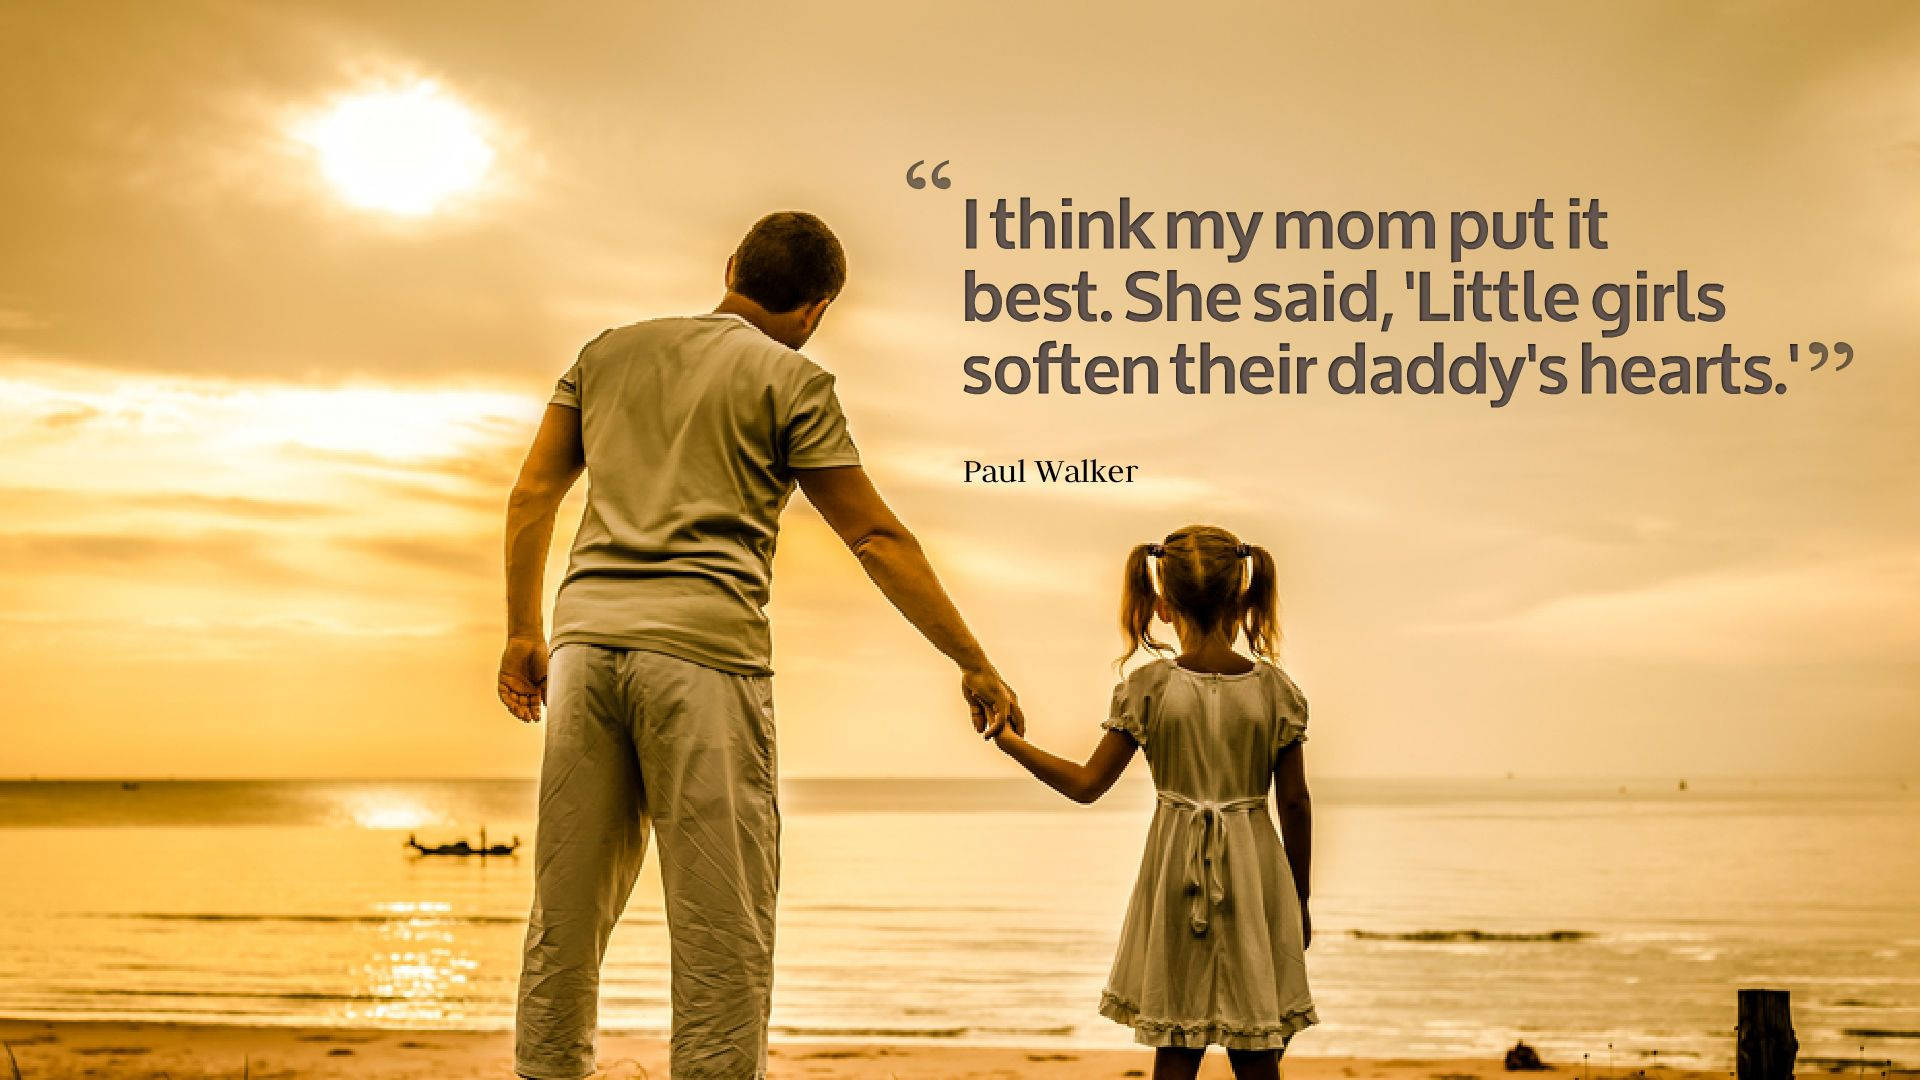 Paul Walker's Quote For Father's Day Wallpaper